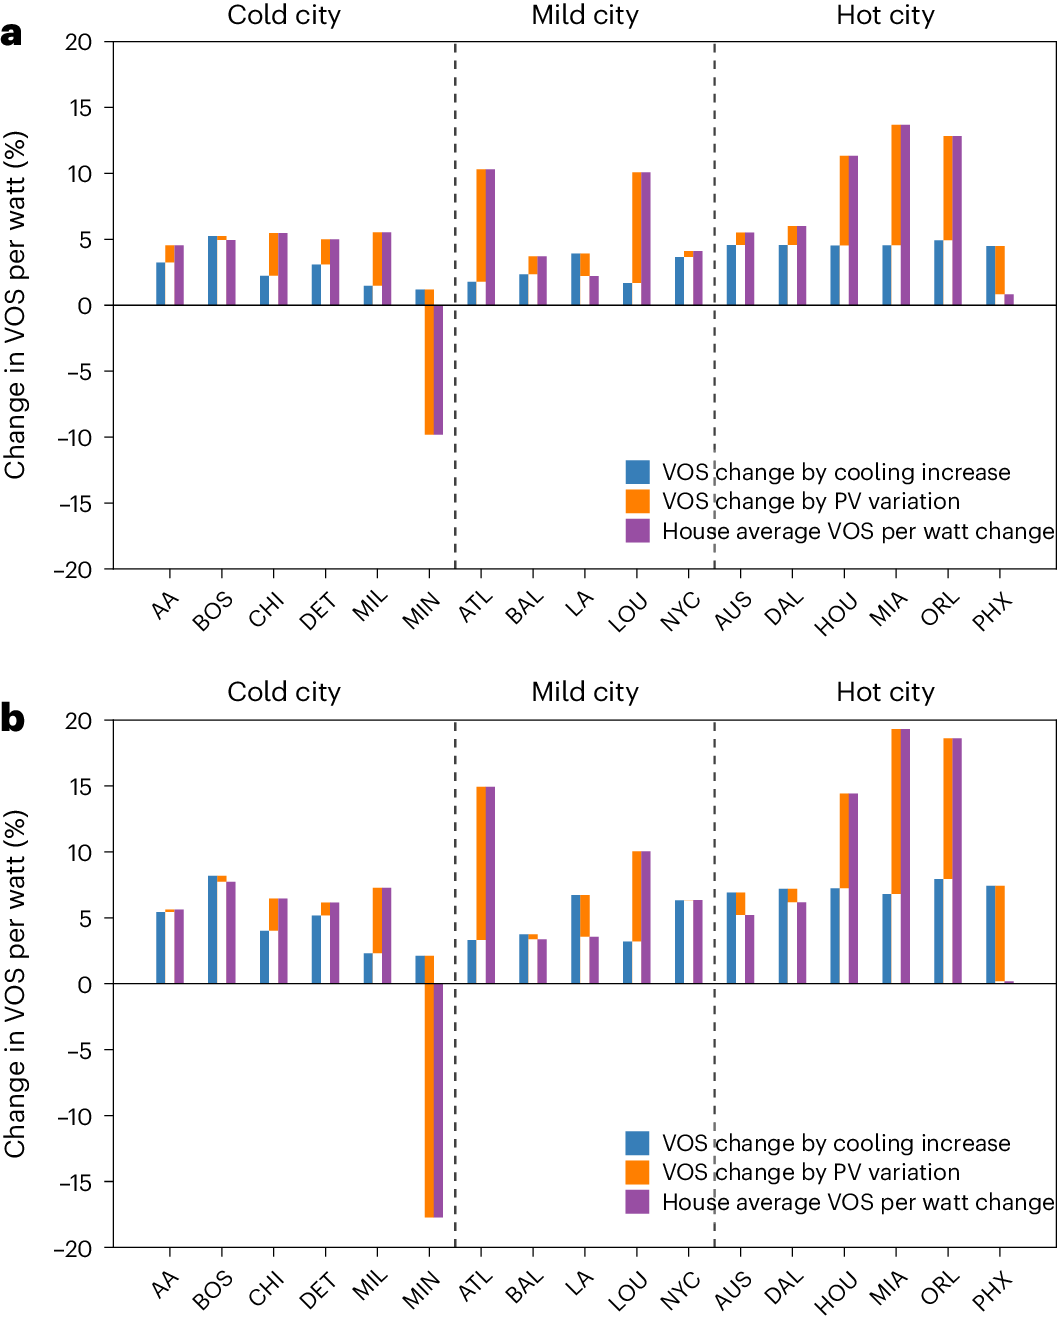 Waterfall charts showing the average change in household revenues from solar per unit of installed solar under a moderate climate warming scenario (RCP 4.5). Subplots (a) and (b) show the changes from 2000 to 2050 and 2100, respectively. Purple bars indicate the total change in household revenues. Blue and orange bars isolate the effects of household cooling and solar radiation changes, respectively, on household revenues.